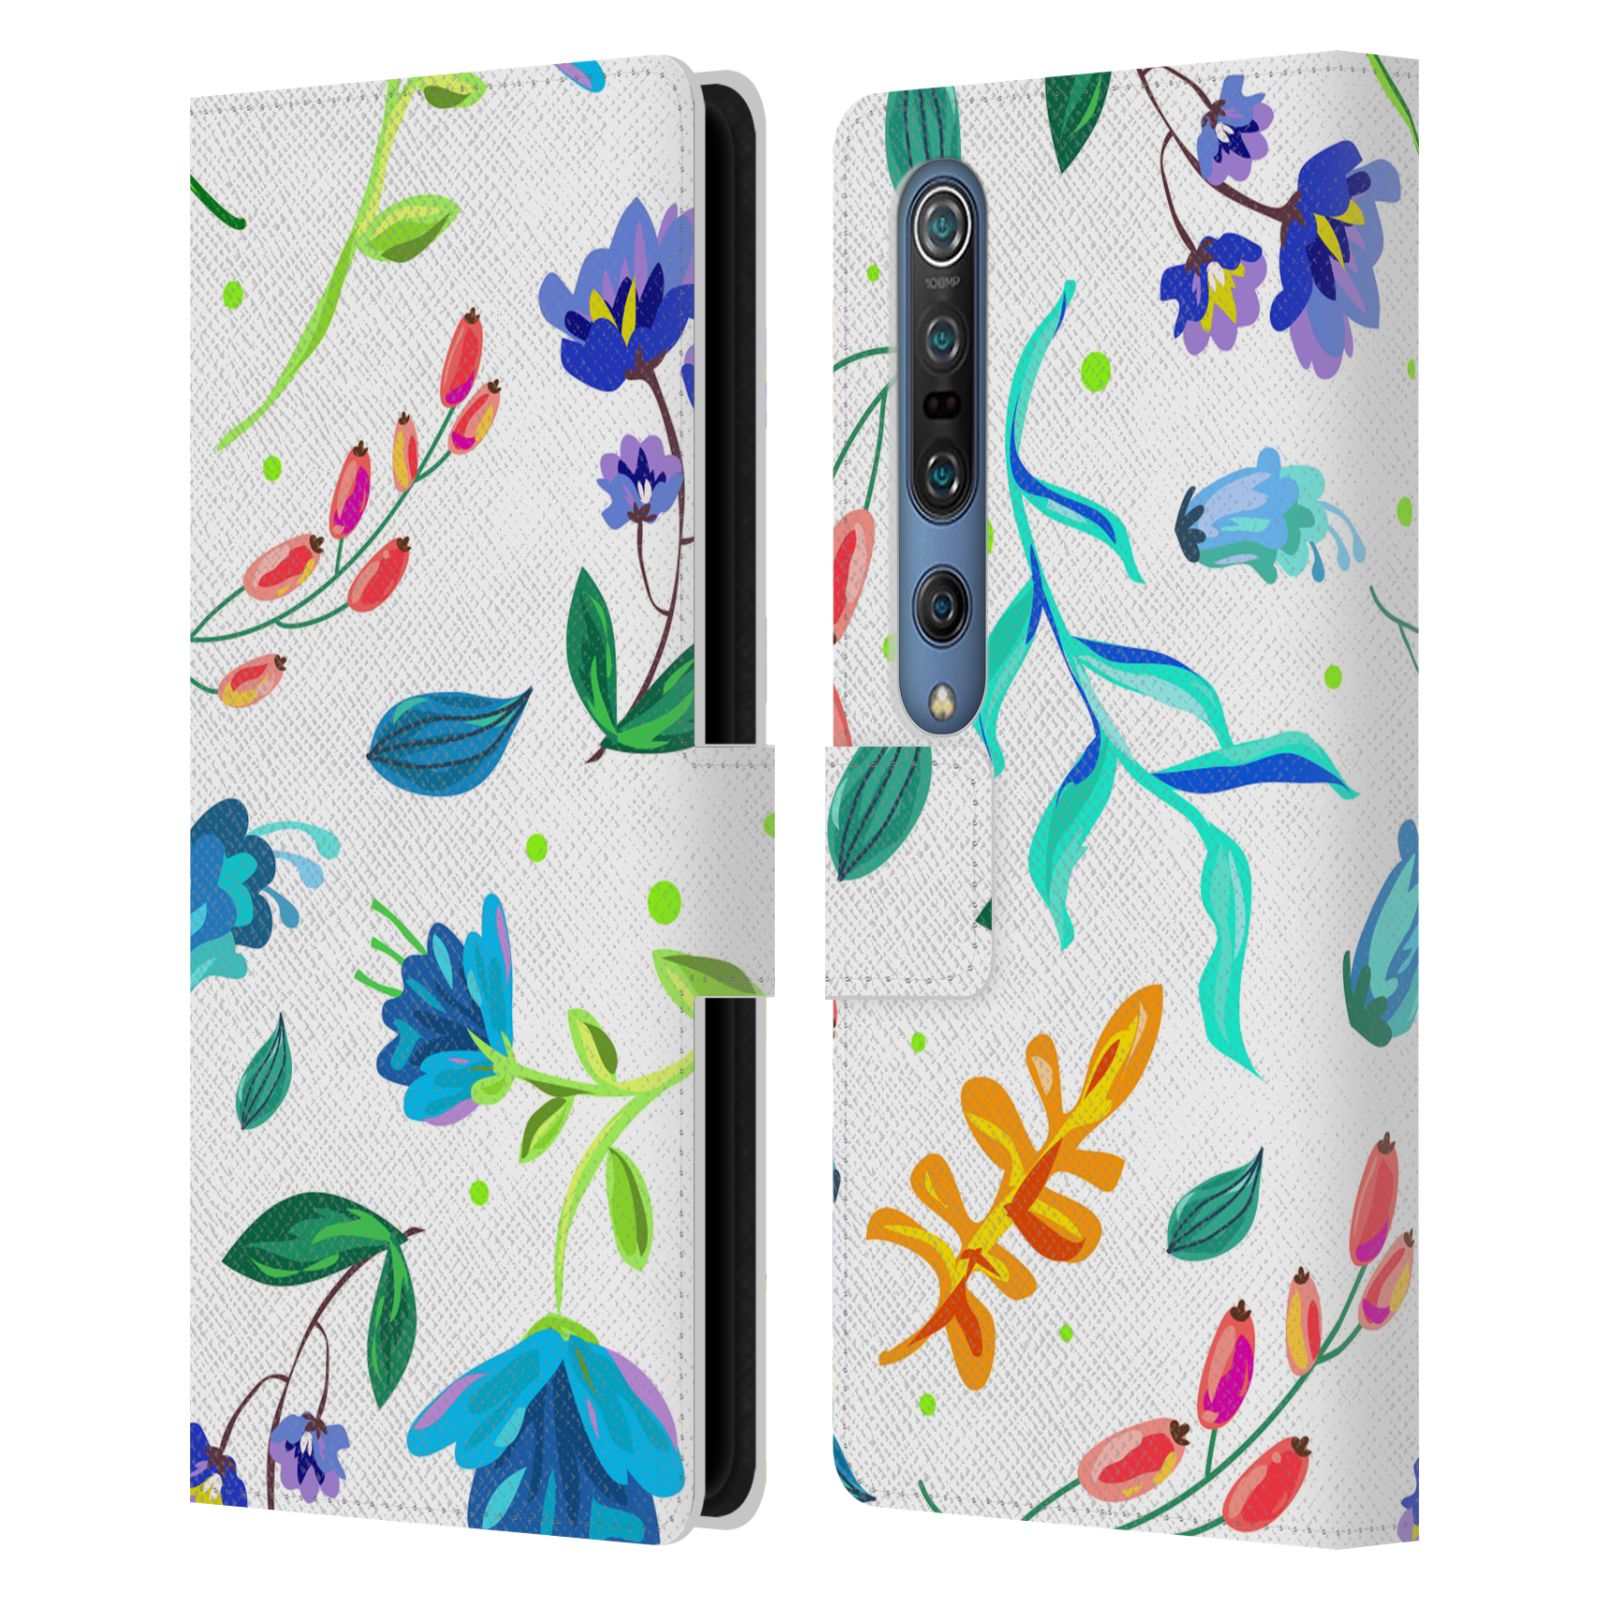 OFFICIAL HAROULITA CUTE FLOWER PATTERN LEATHER BOOK CASE FOR XIAOMI PHONES